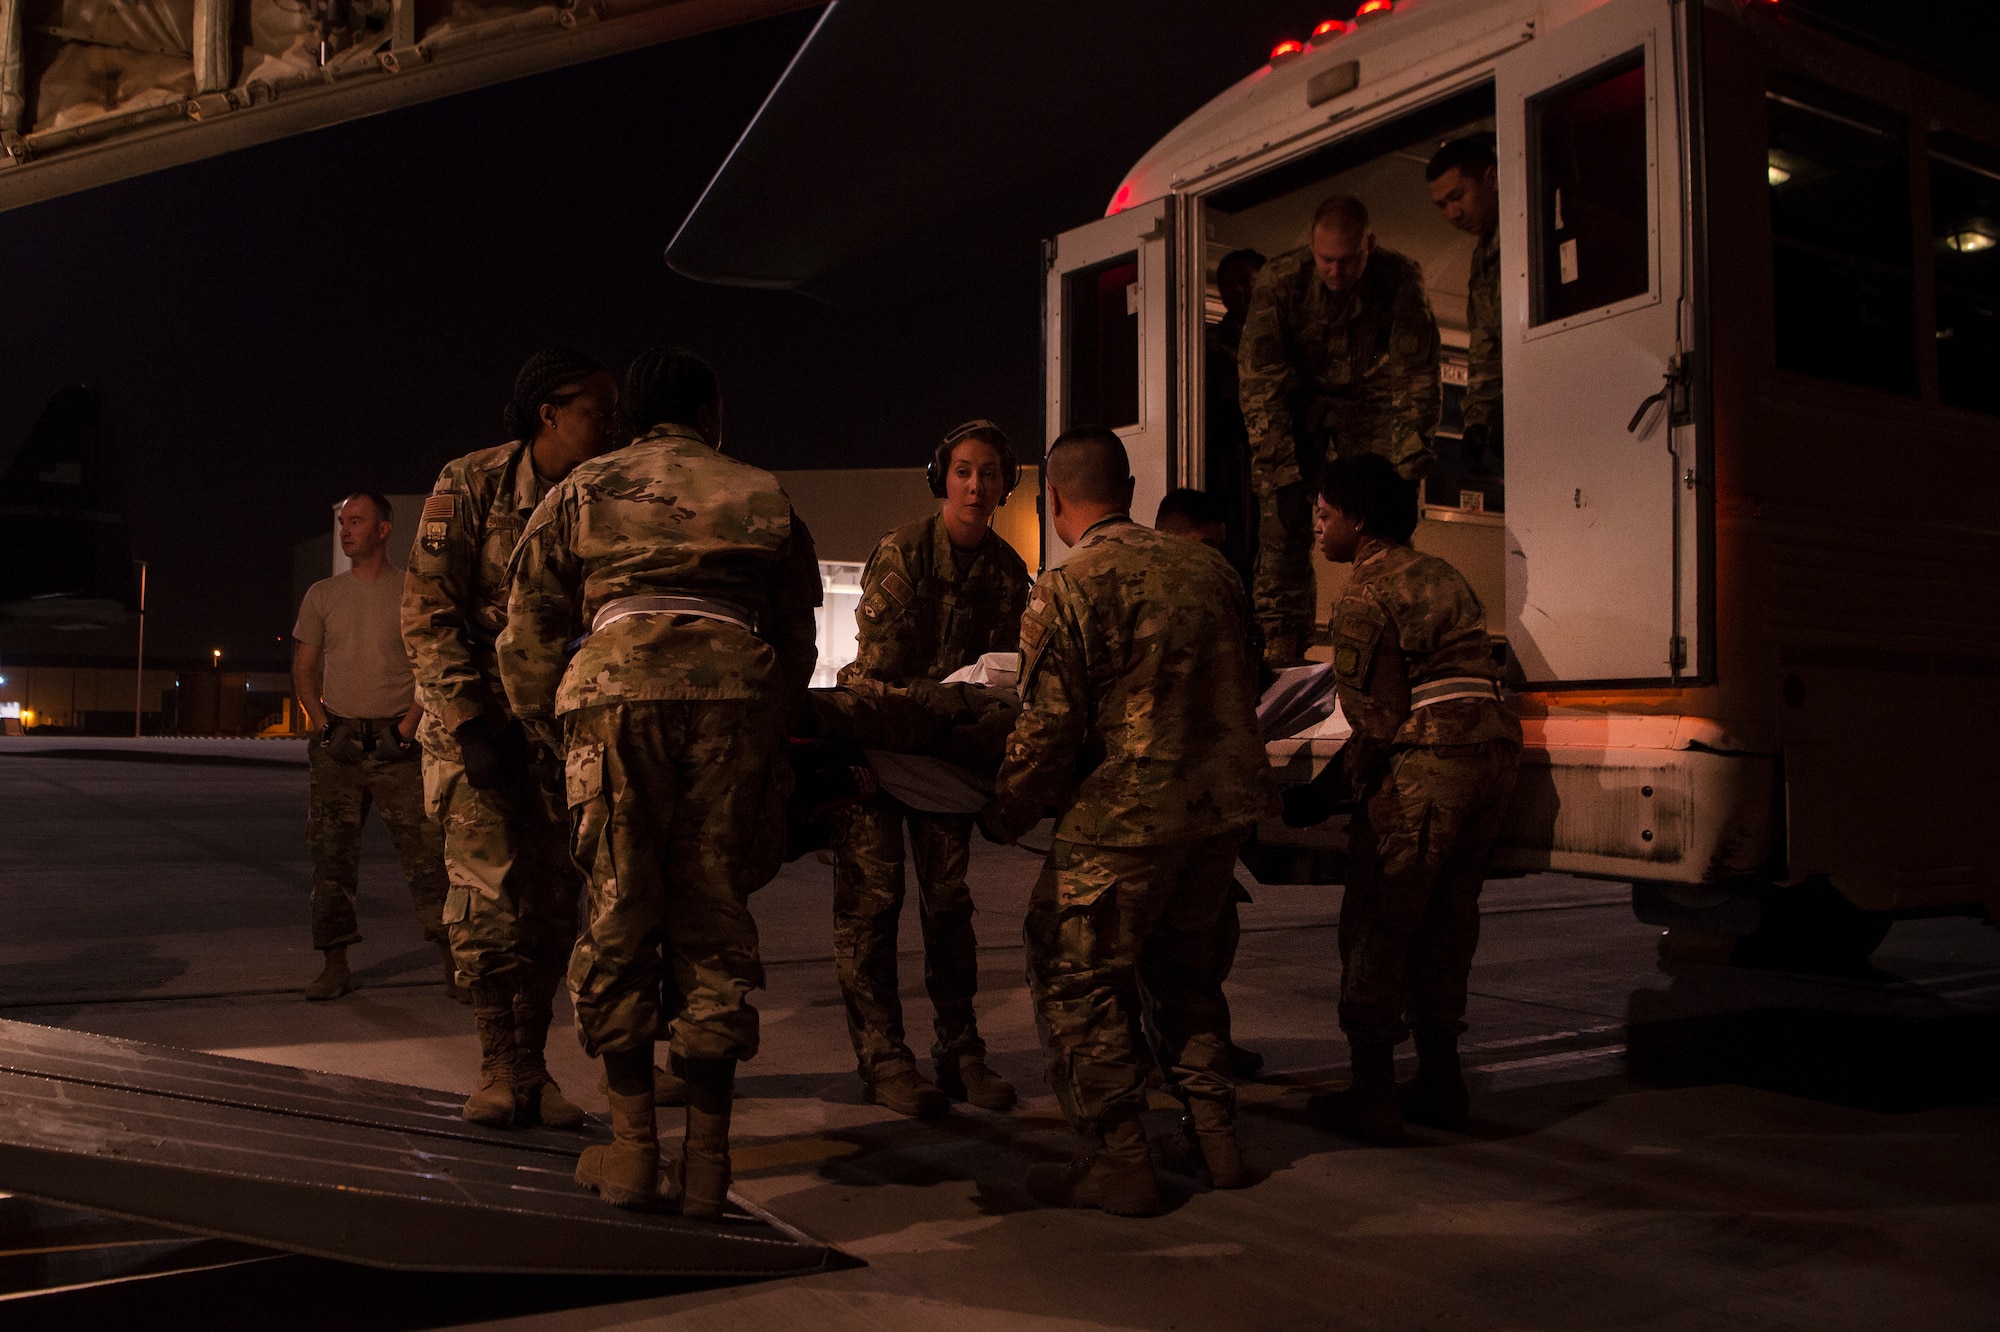 Capt. Aline Putnam, center, 379th Expeditionary Aeromedical Evacuation Squadron (EAES) flight nurse, helps Airmen of the 379th Expeditionary Medical Group’s En Route Patient Staging Facility, move a patient for transport at Al Udeid Air Base, Qatar, after a recent aeromedical evacuation mission.